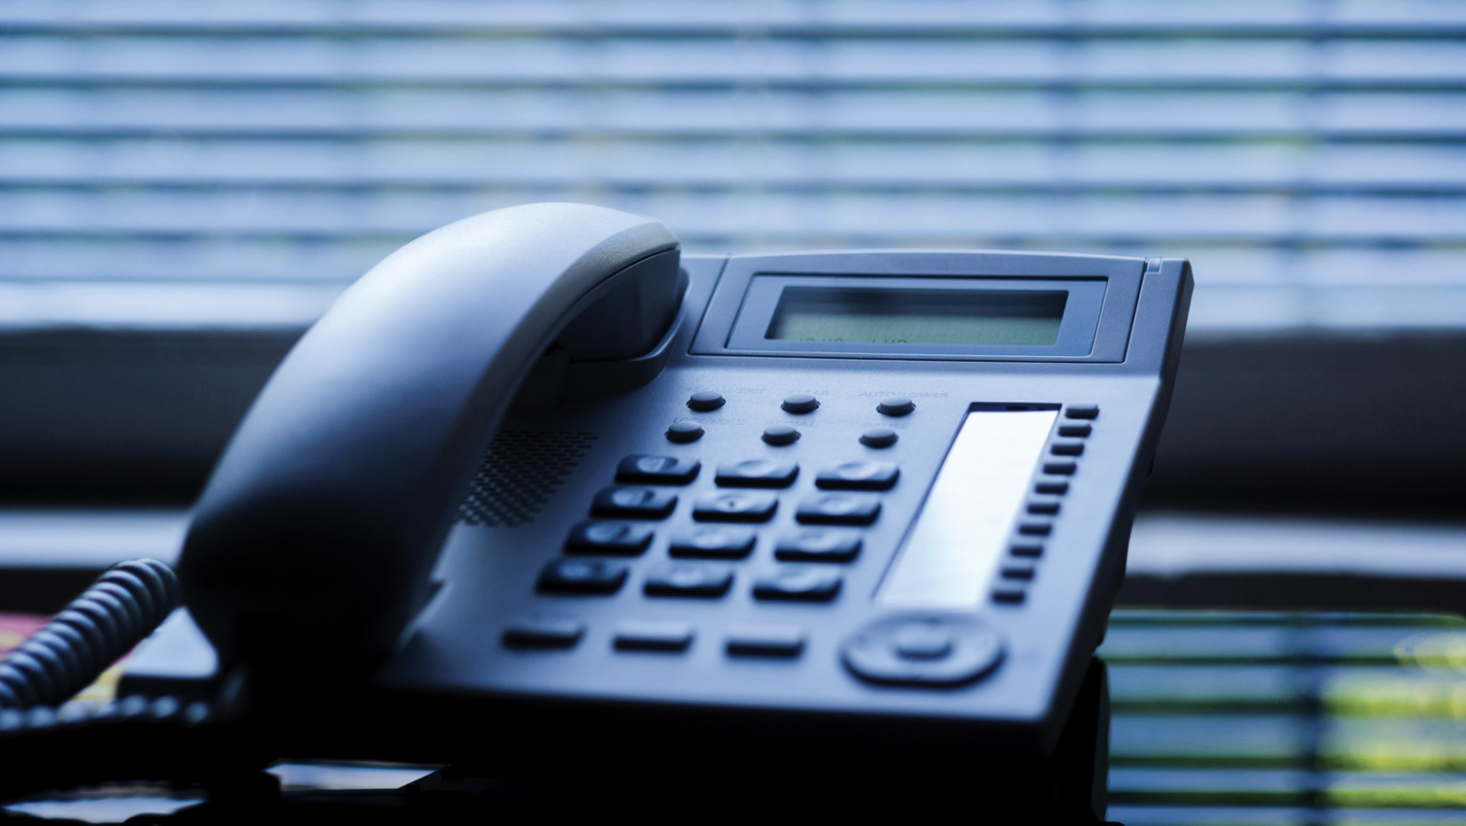 voip phone business